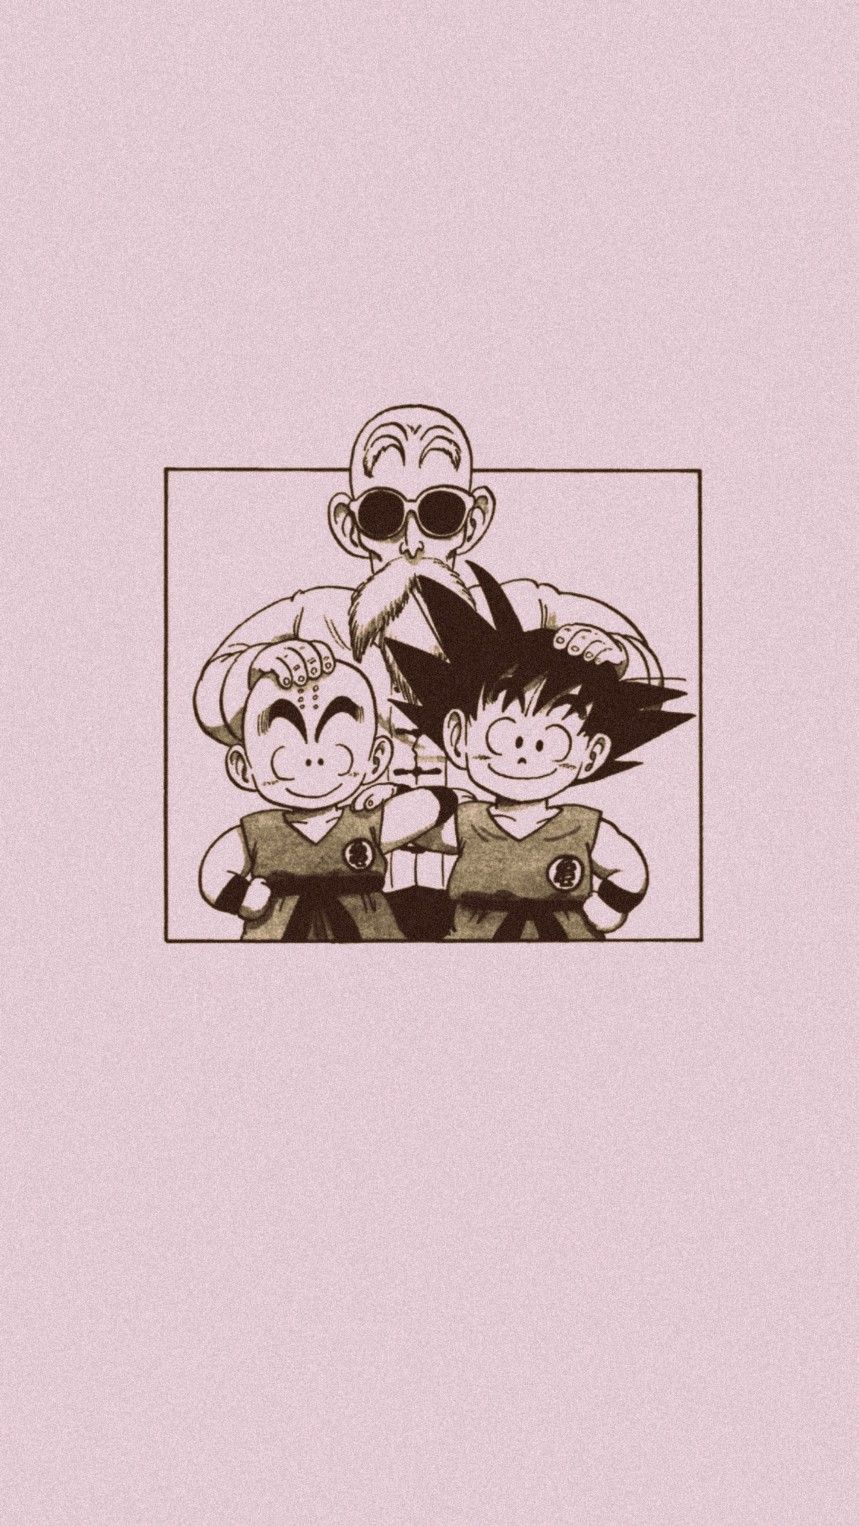 A drawing of three people in the same frame - Dragon Ball